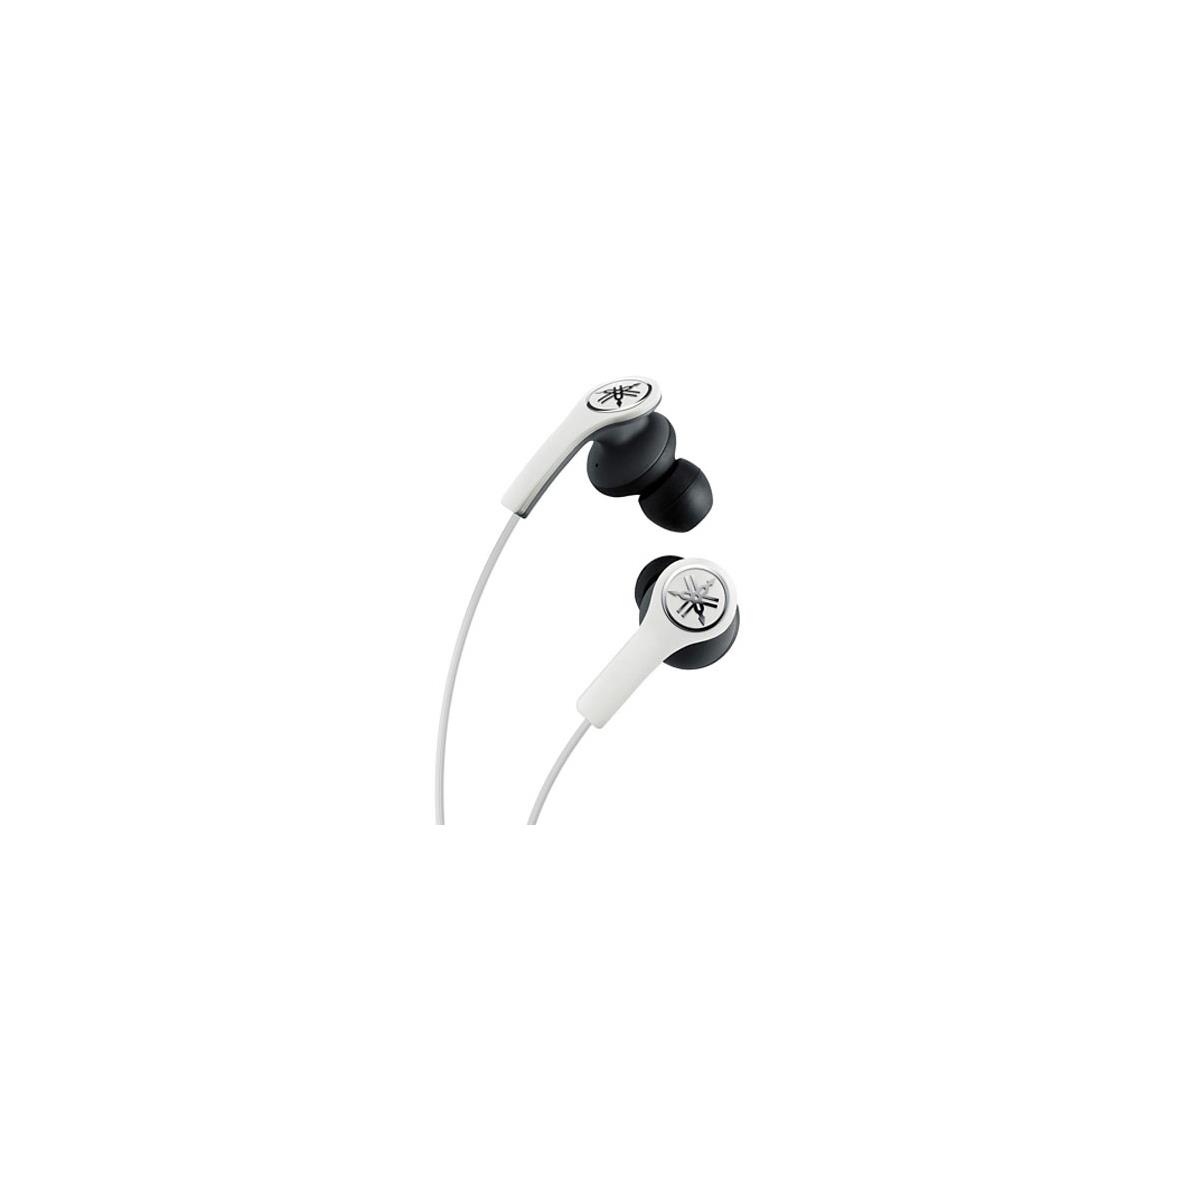 Image of Yamaha EPH-M200WH 30mW High-Performance Earphones with Remote and Mic